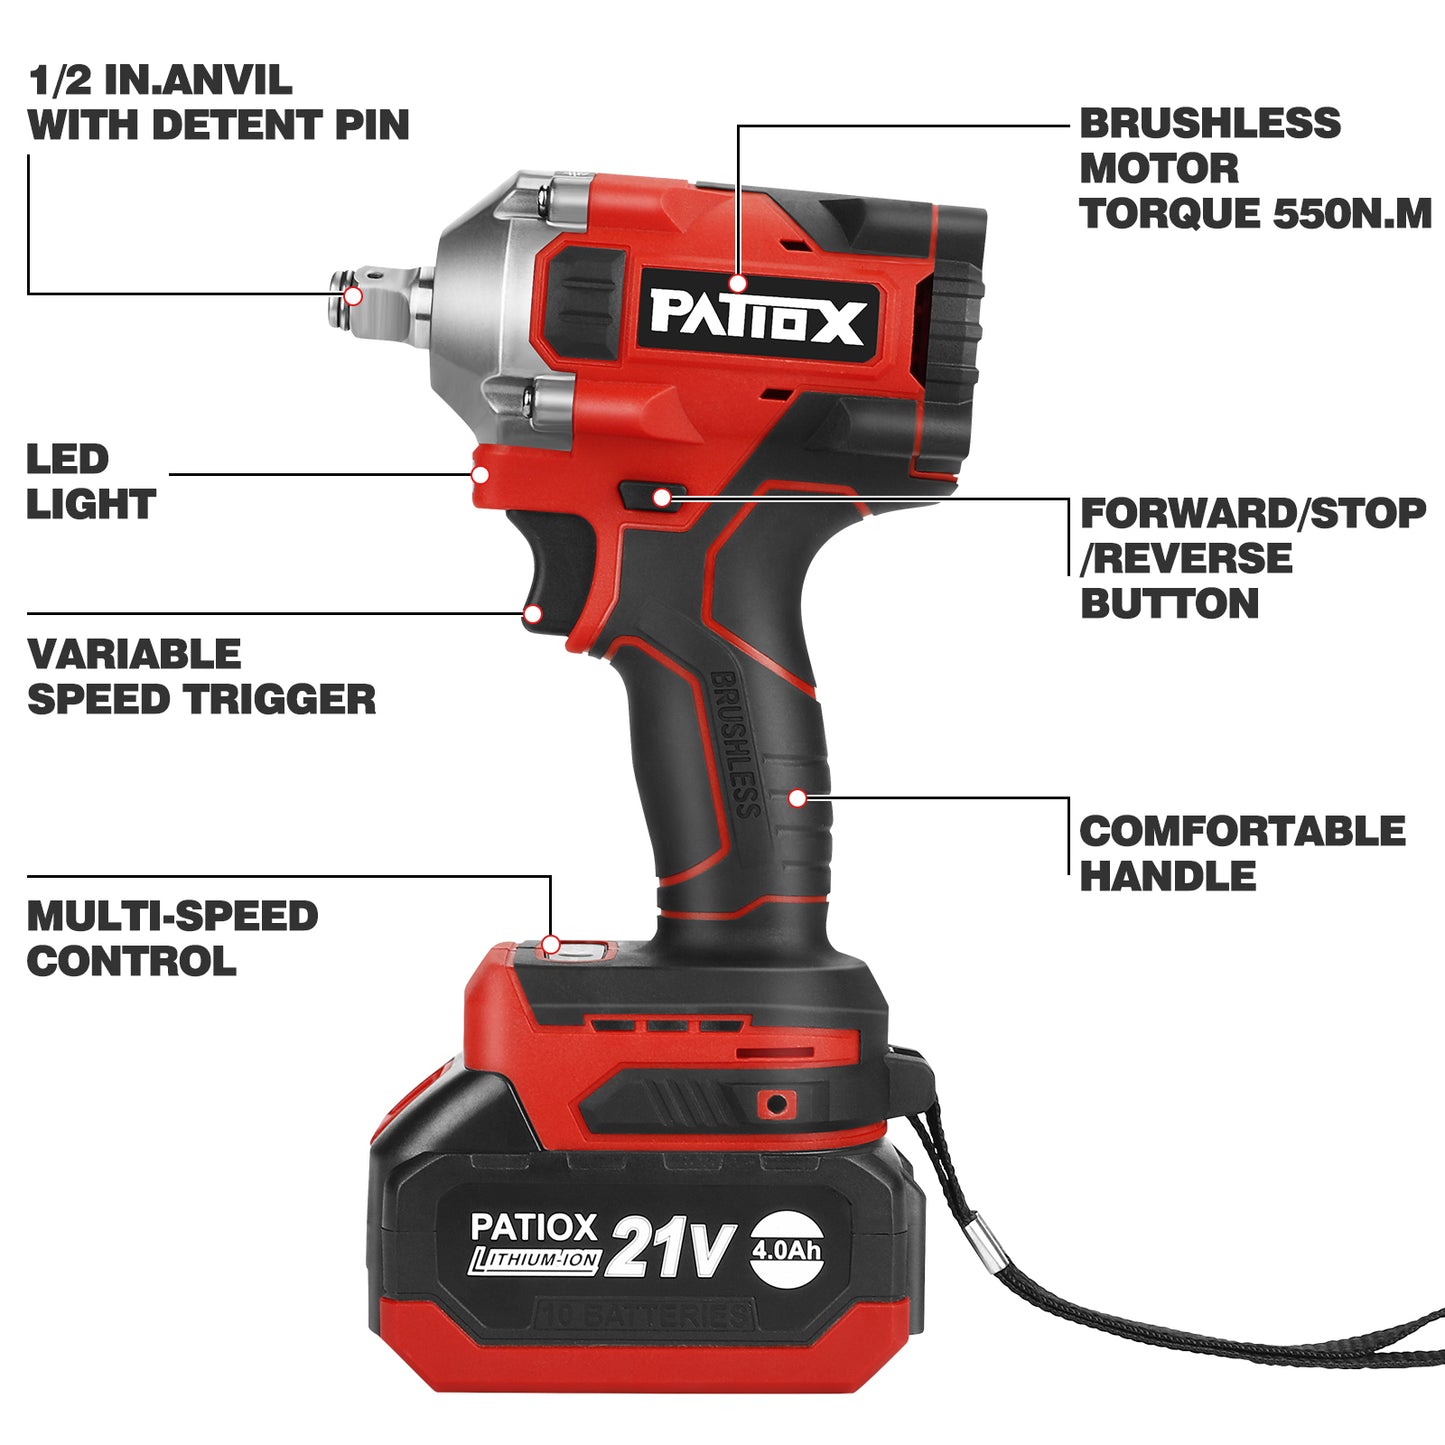 PATIOX Power Impact Wrench High Torque 1/2" Electric Impact Gun,Impact Wrench Max Torque 410 ft lbs, Cordless, Impact wrenchs Kit with 4.0A Battery,Fast Charger LED Light